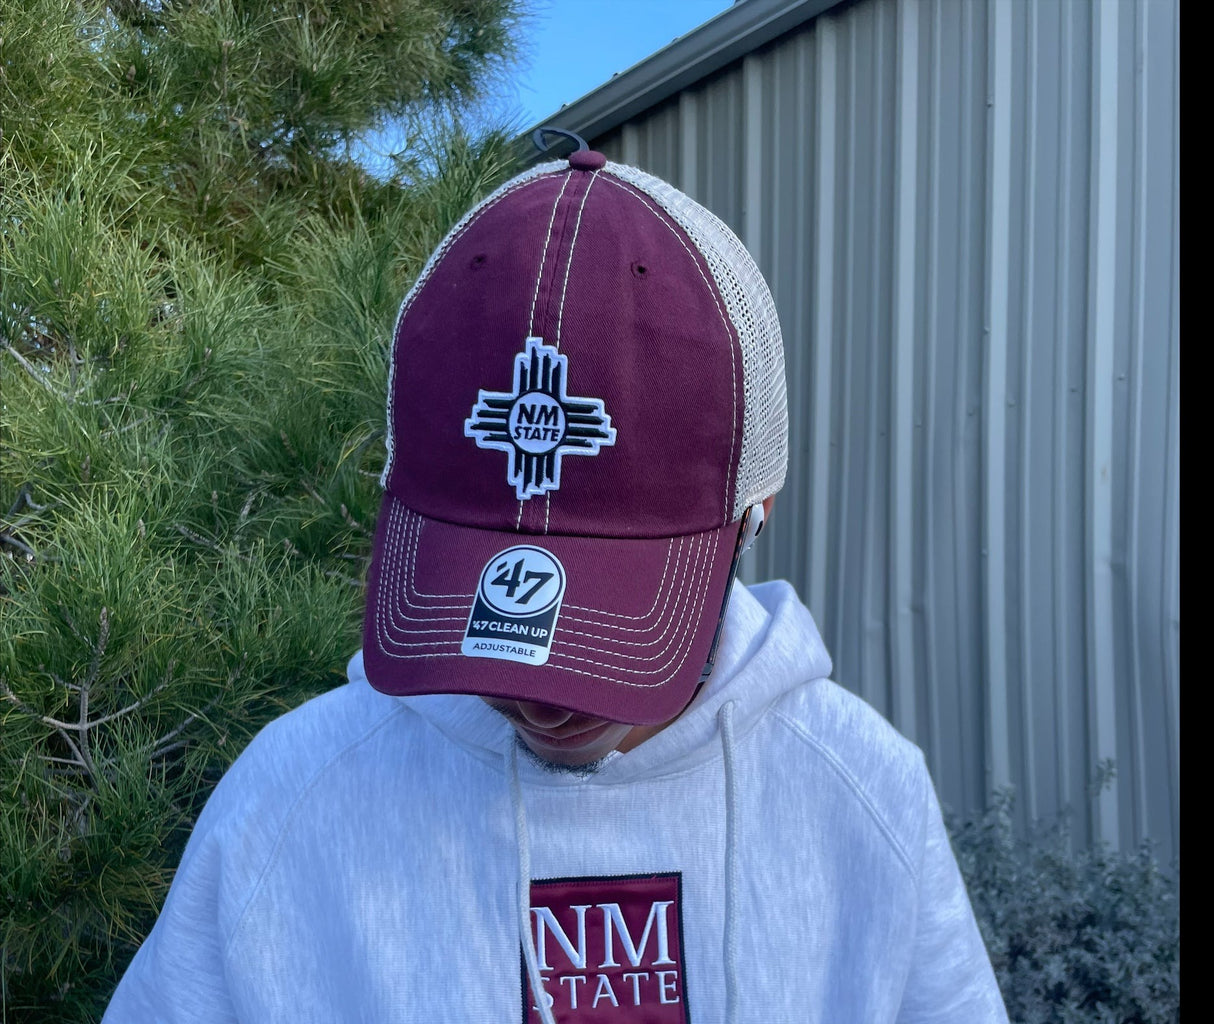 NM State Zia Patch 47 Adjustable Cap